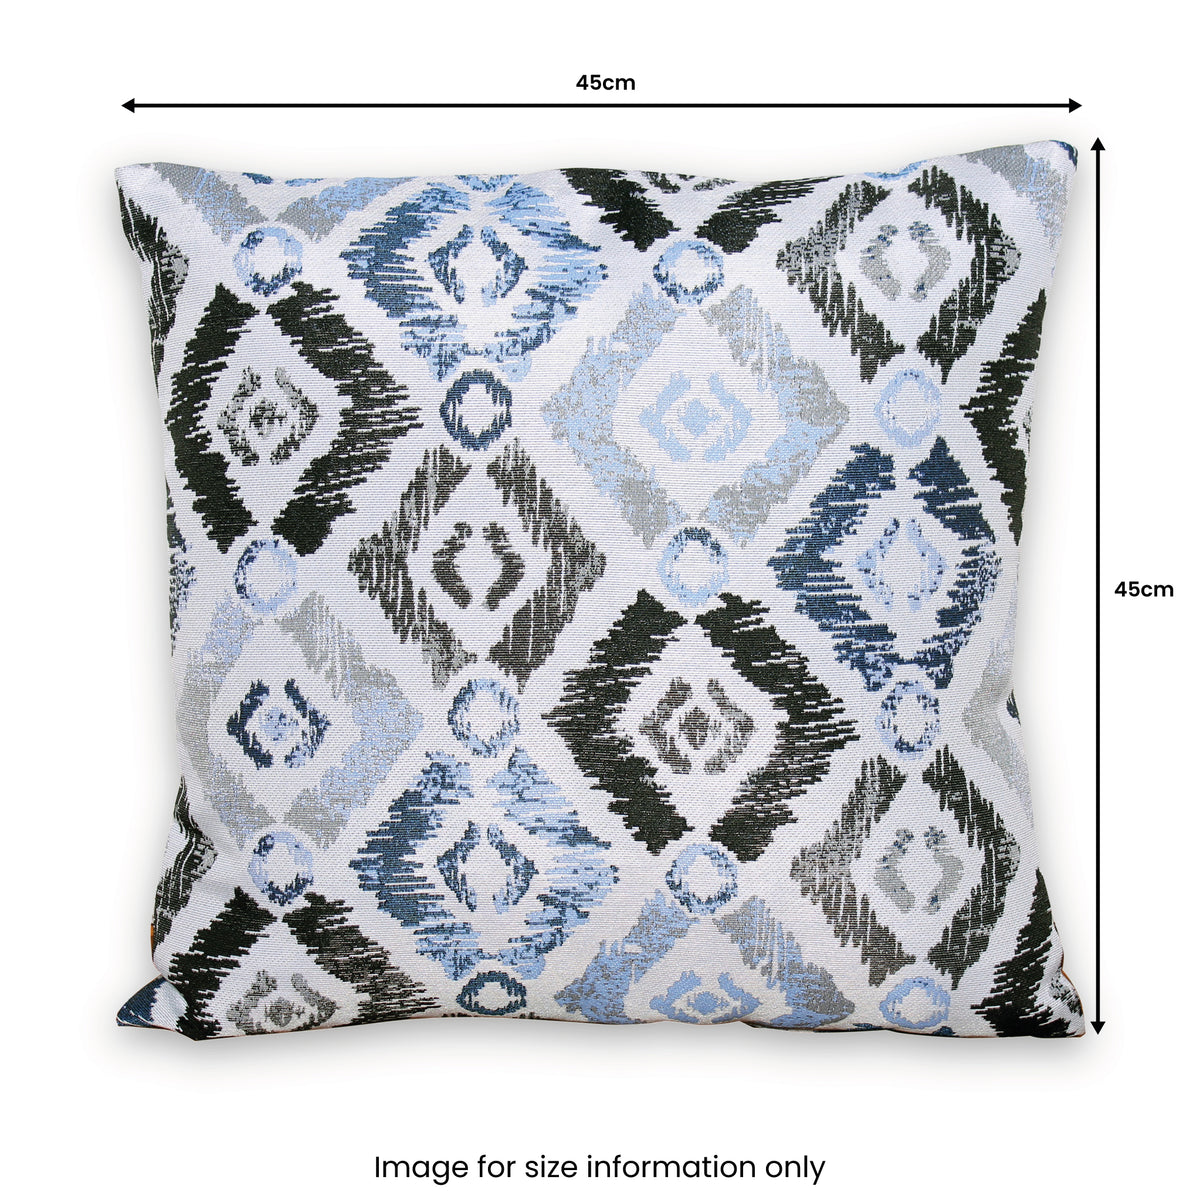 Outdoor Blue Patterned Scatter Cushion dimensions